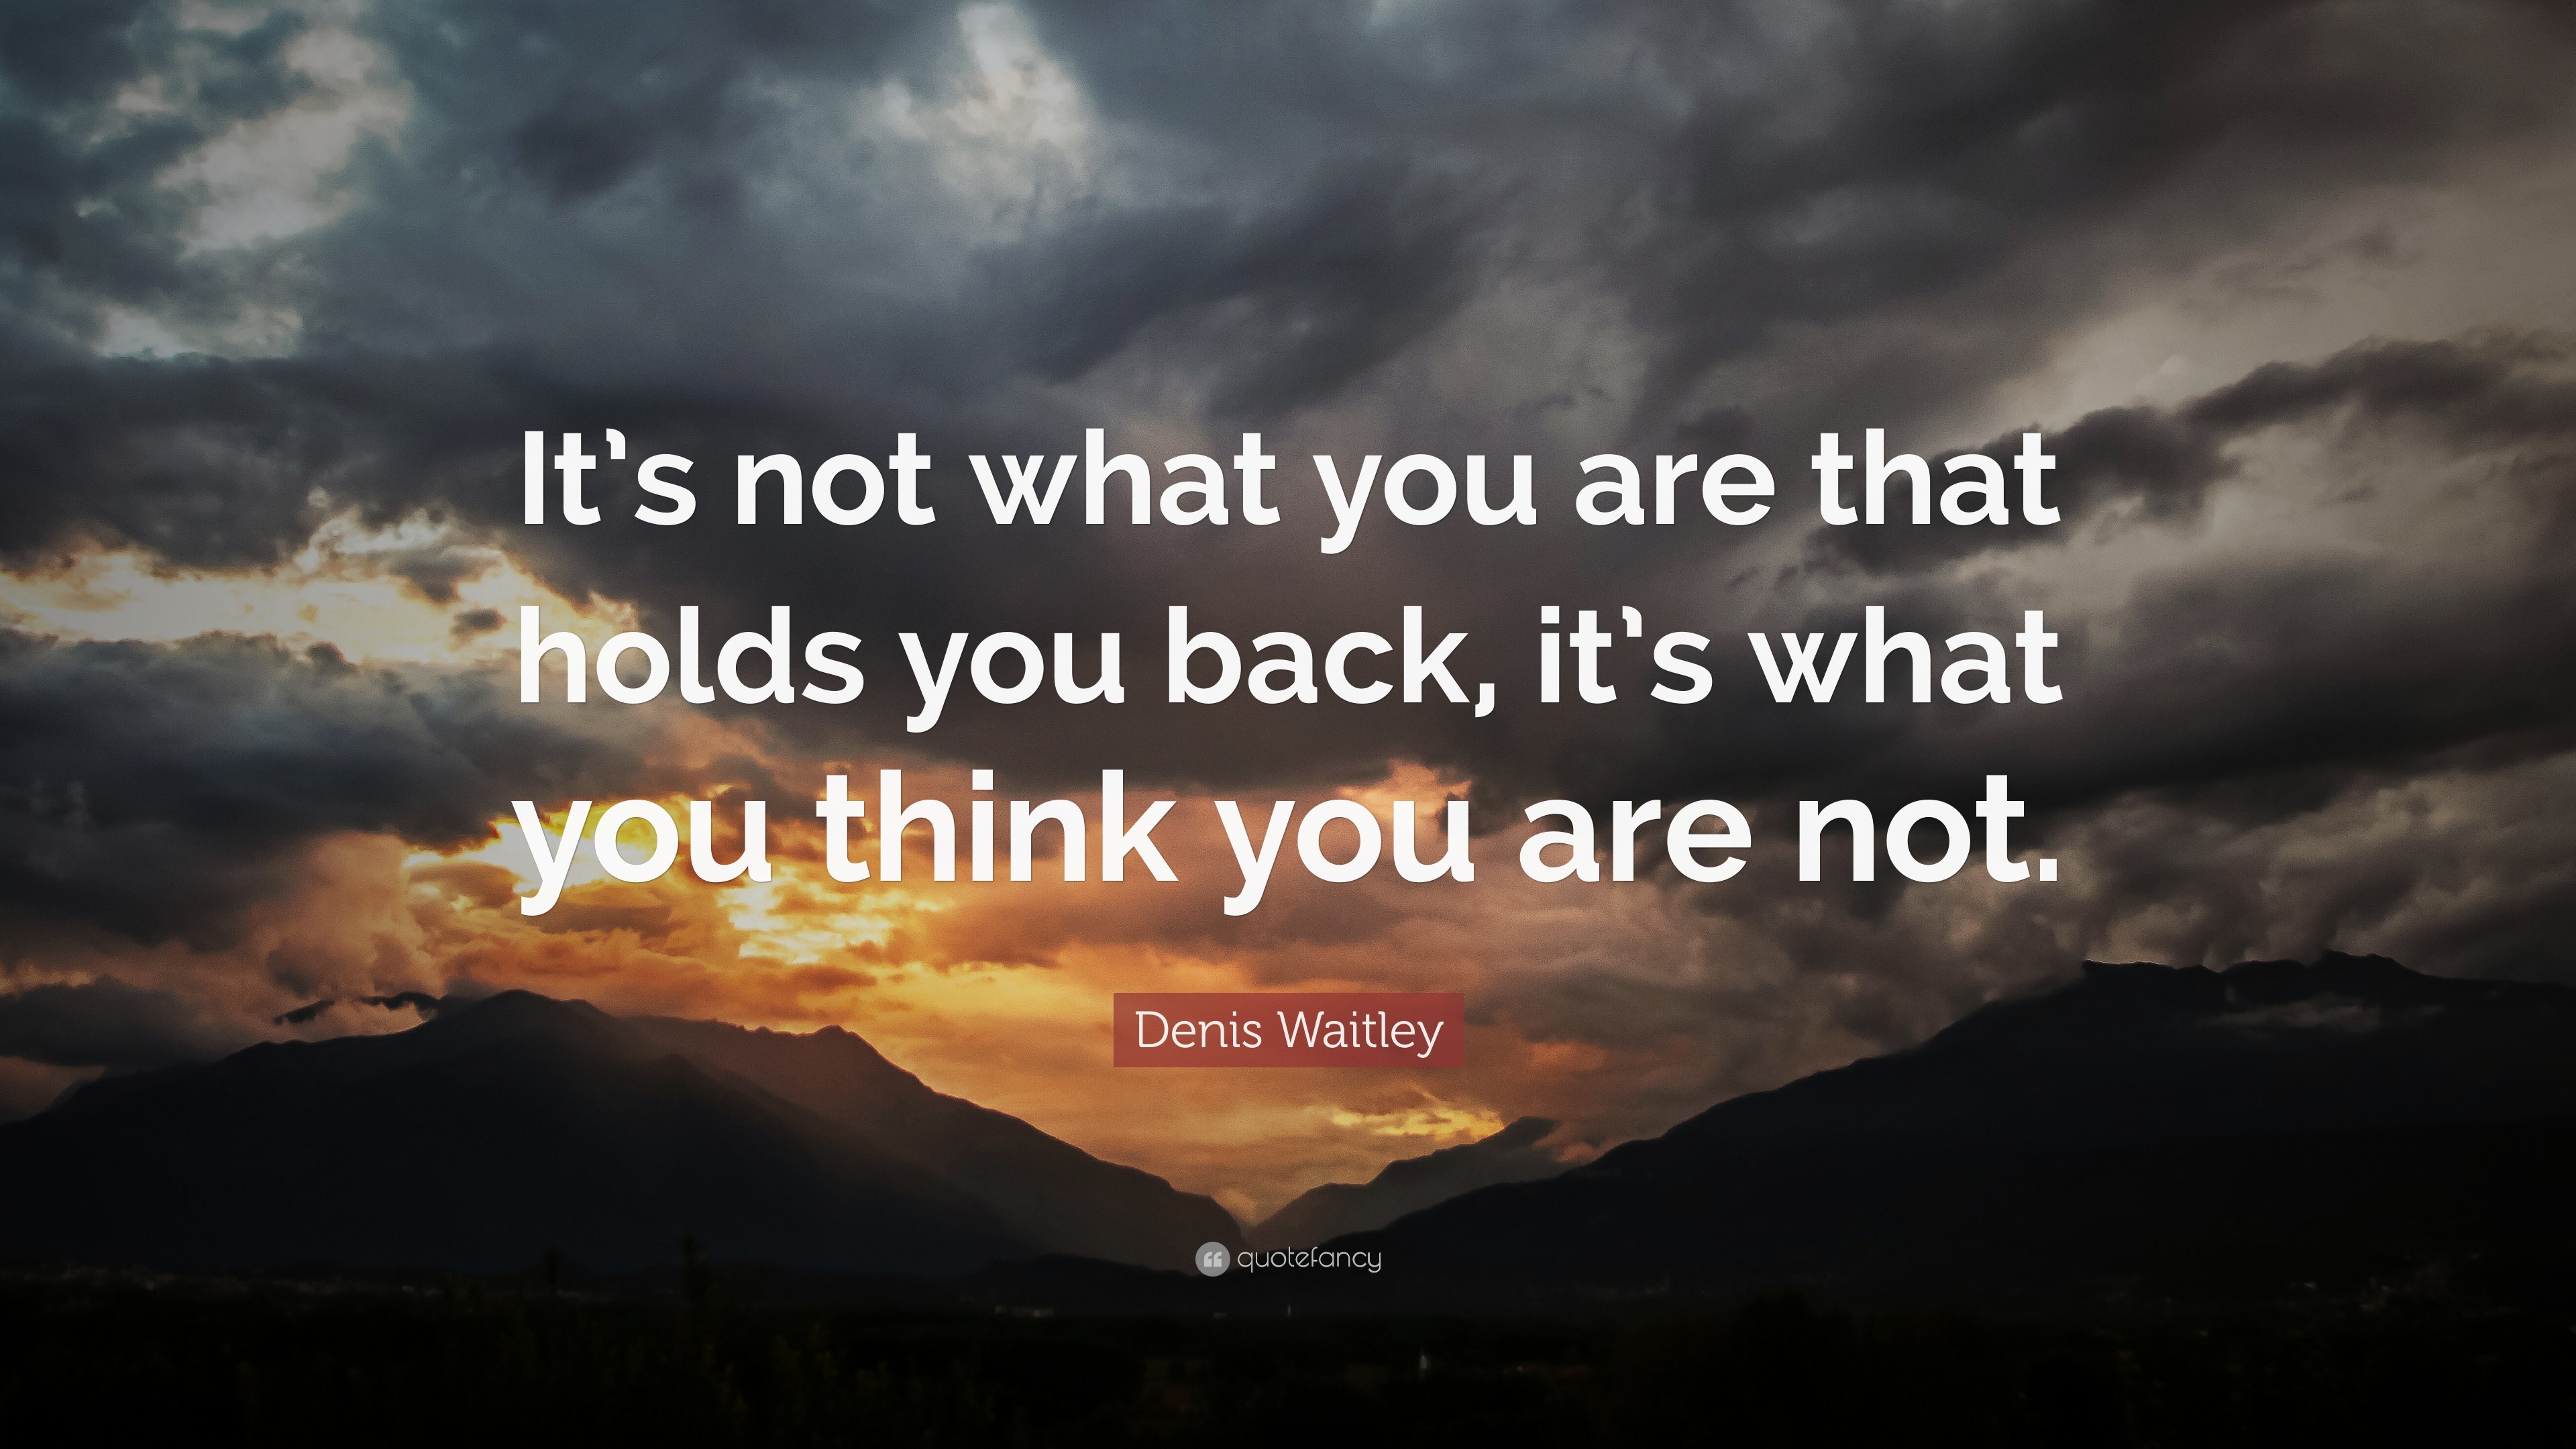 Denis Waitley Quote “It s not what you are that holds you back it s